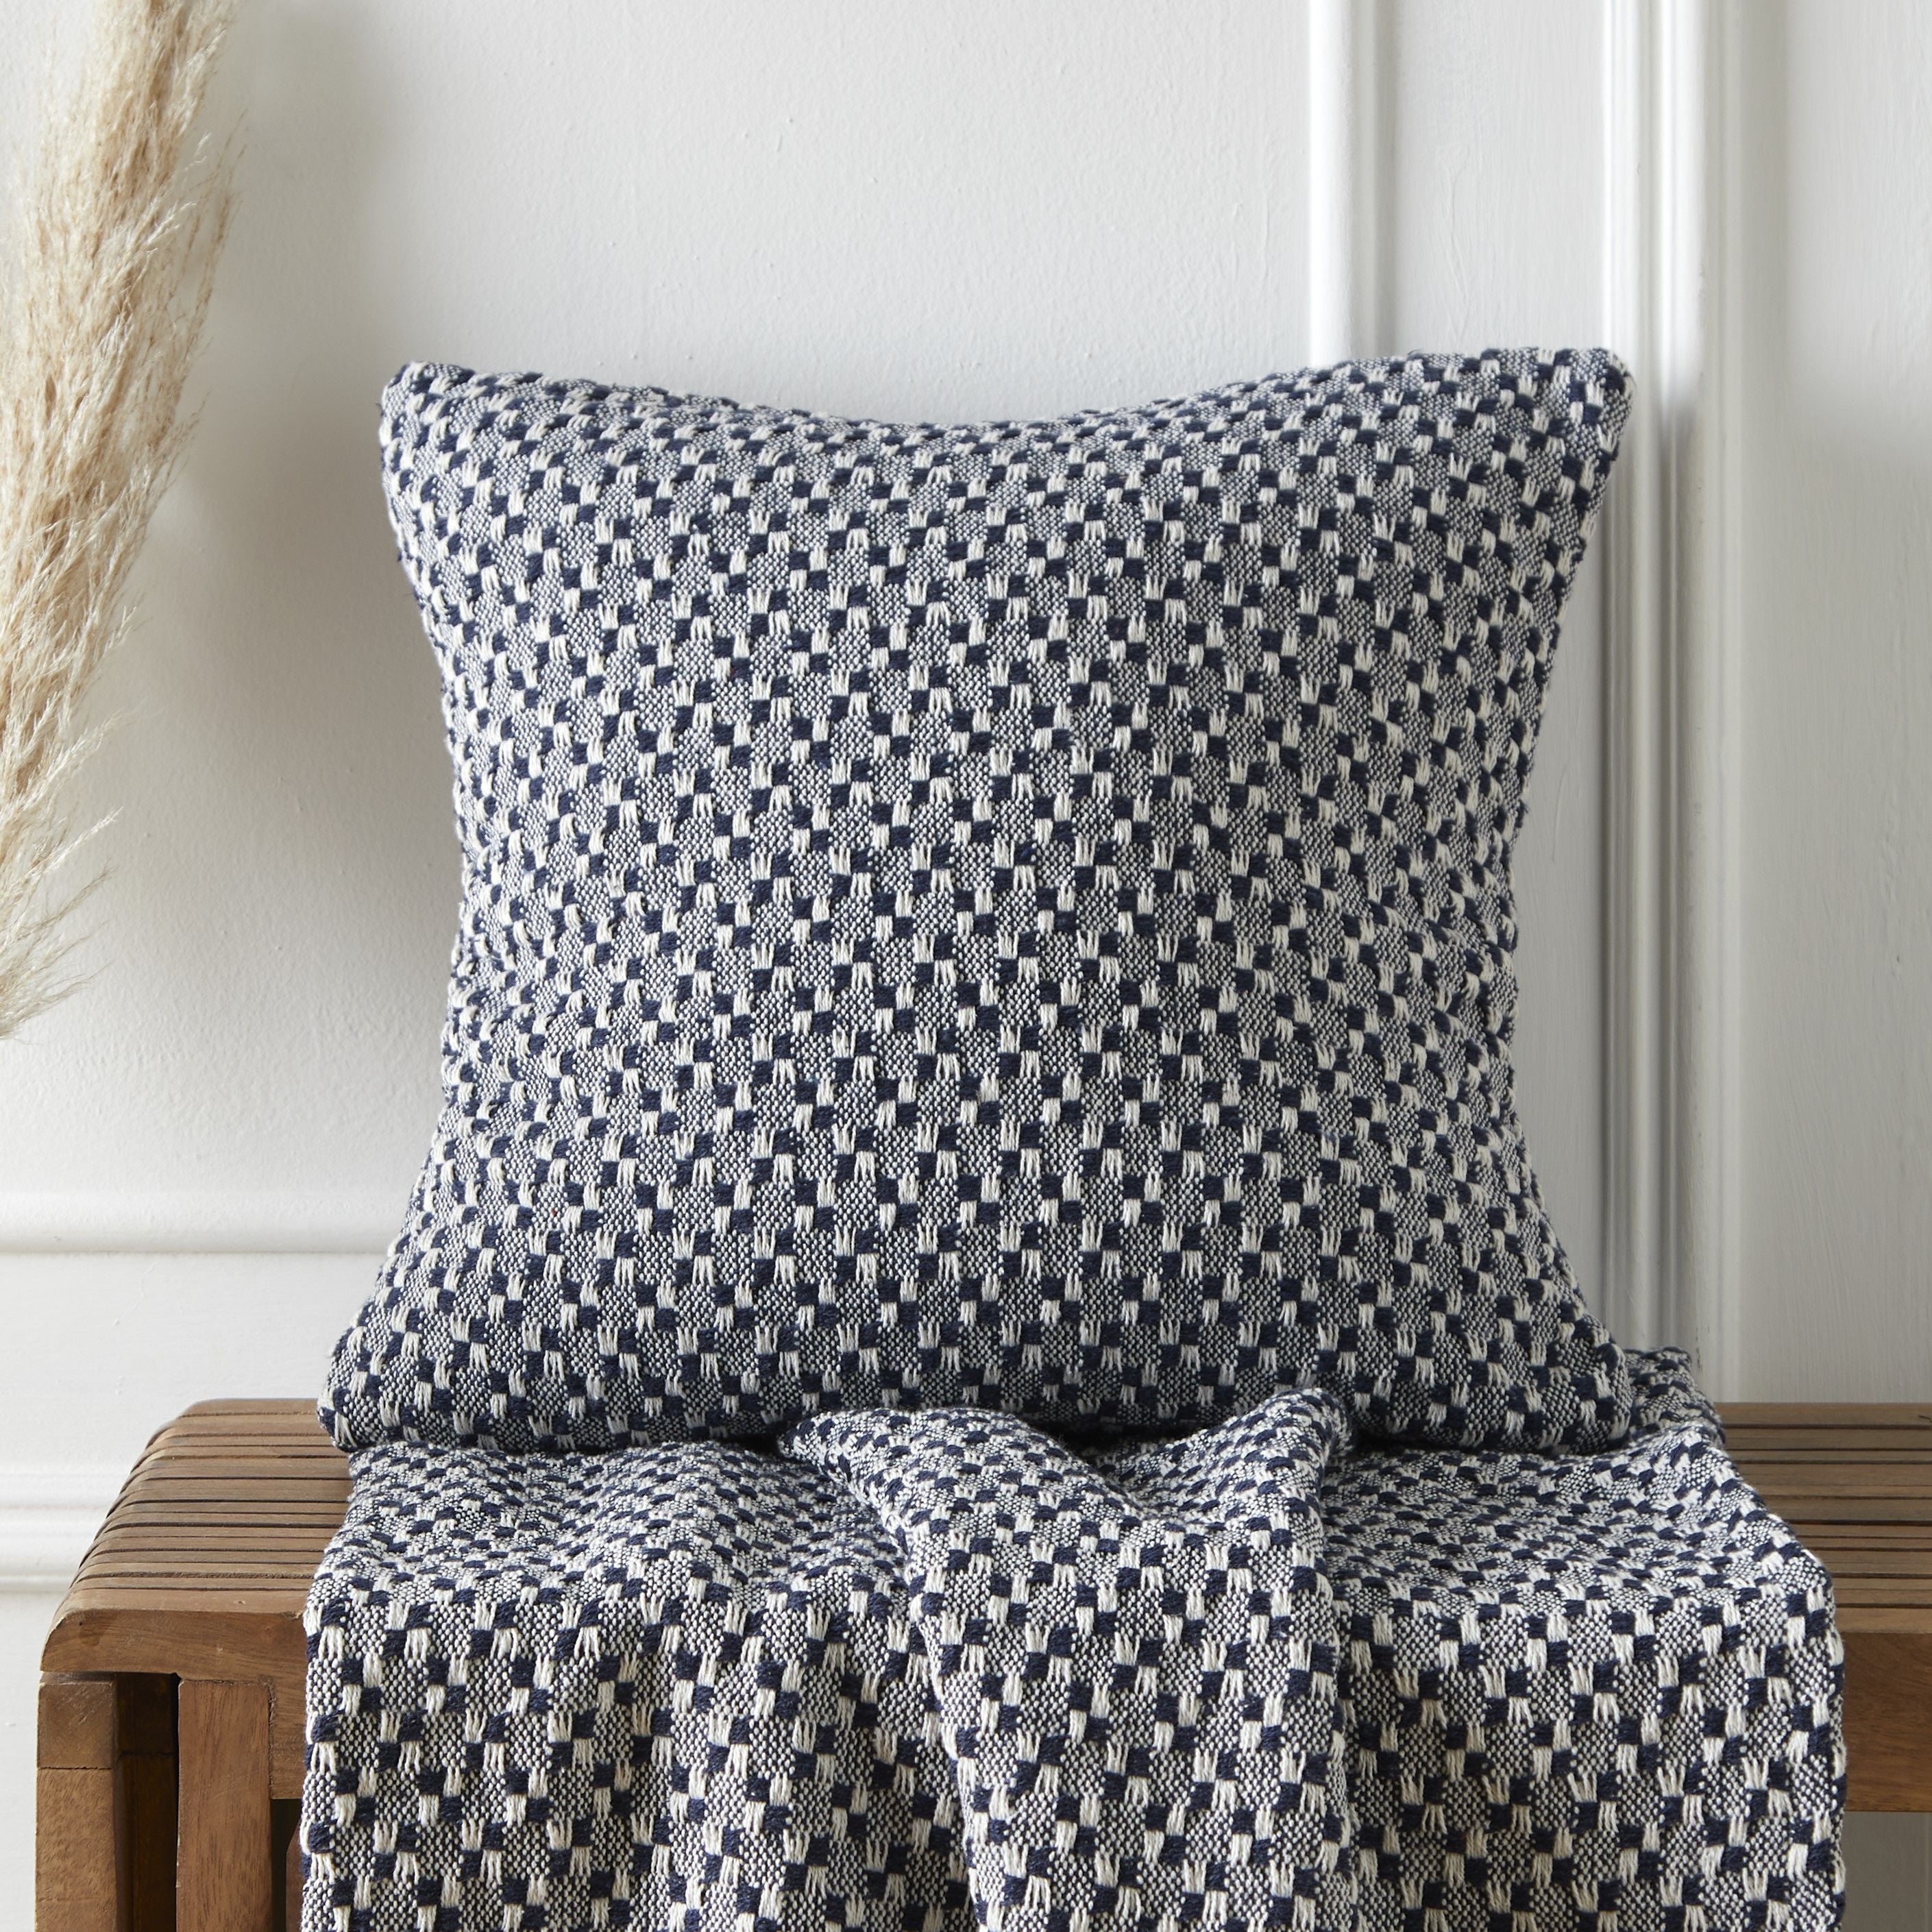 Appletree Bexley Recycled Cushion Cover - Navy